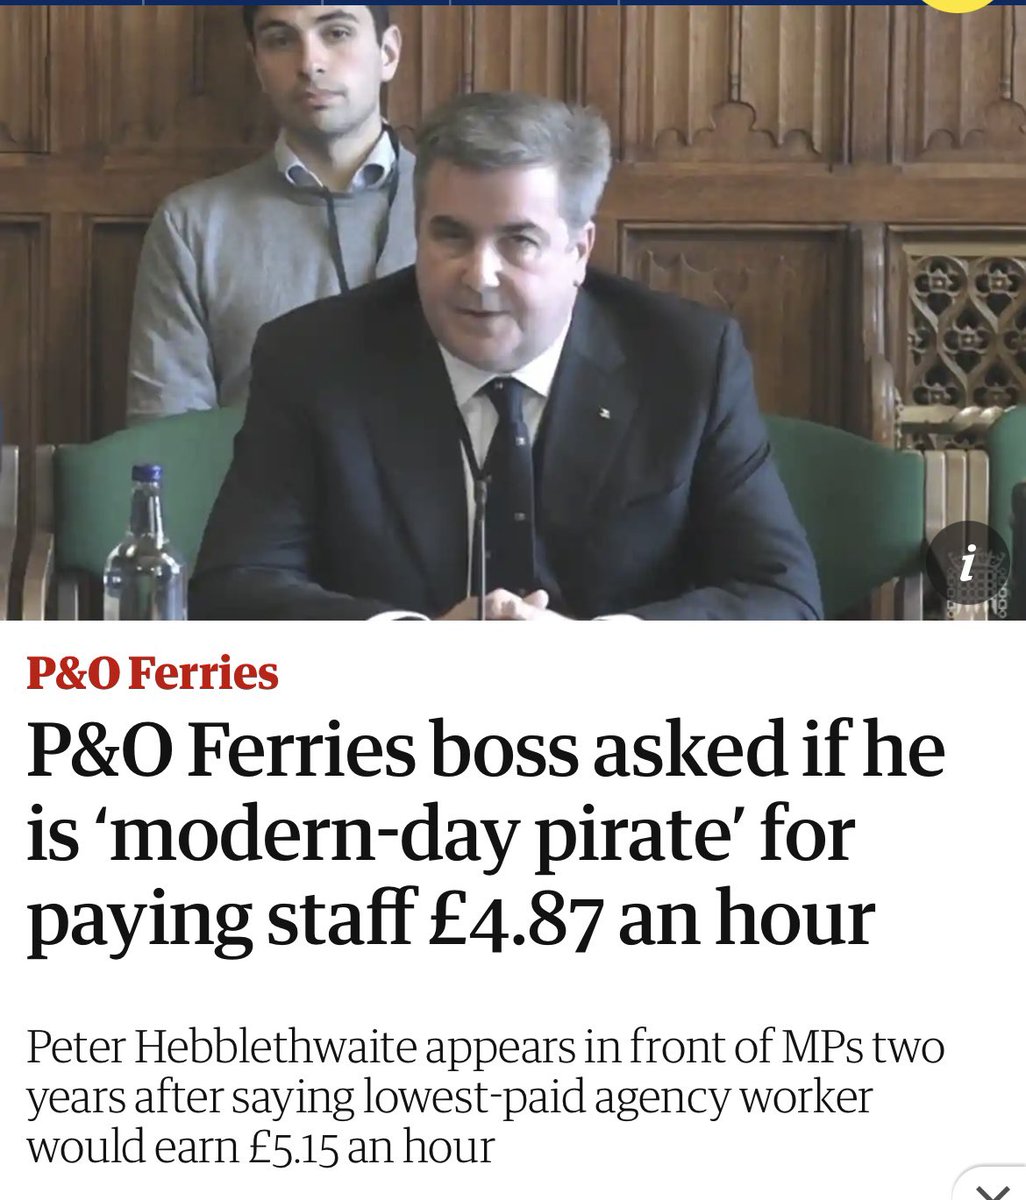 The death throes of what we term ‘capitalism’ in one vignette: P&O boss Peter Hebblethwaite got £500k in salary and bonuses the year after the company sacked 800 workers. The lowest paid now earn £4.87 an hour. If this doesn’t enrage you or you don’t want to fix it you’re a slave